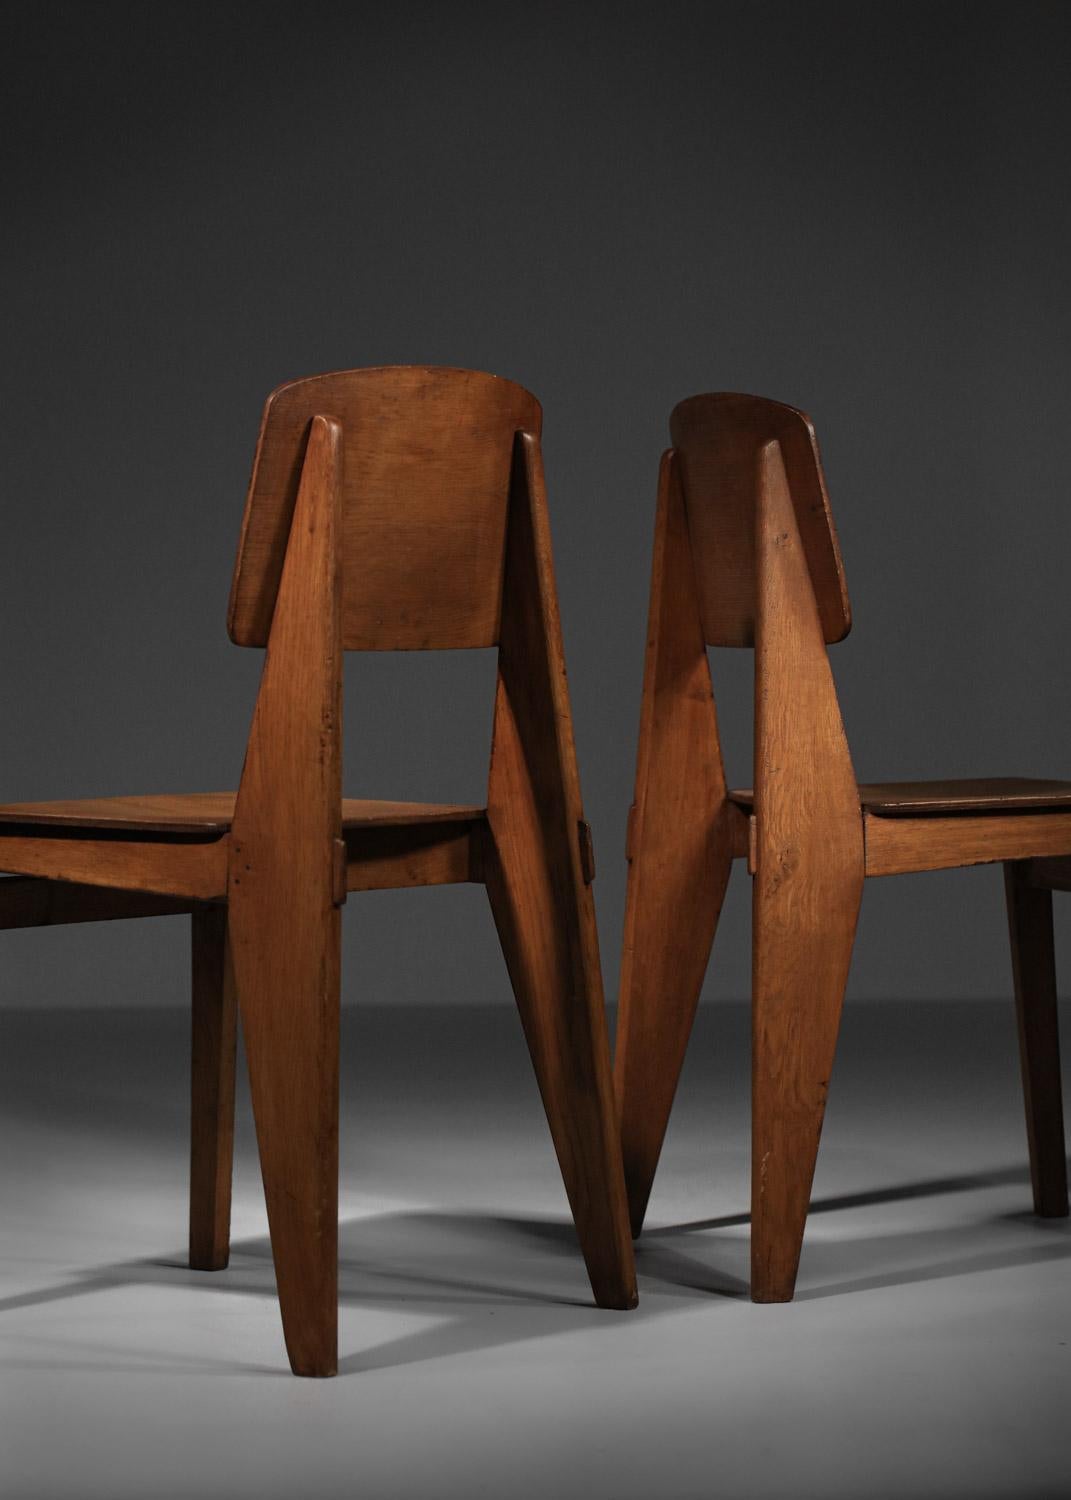 rare Pair of Jean Prouvé all-wood chairs 1950's French design  For Sale 5